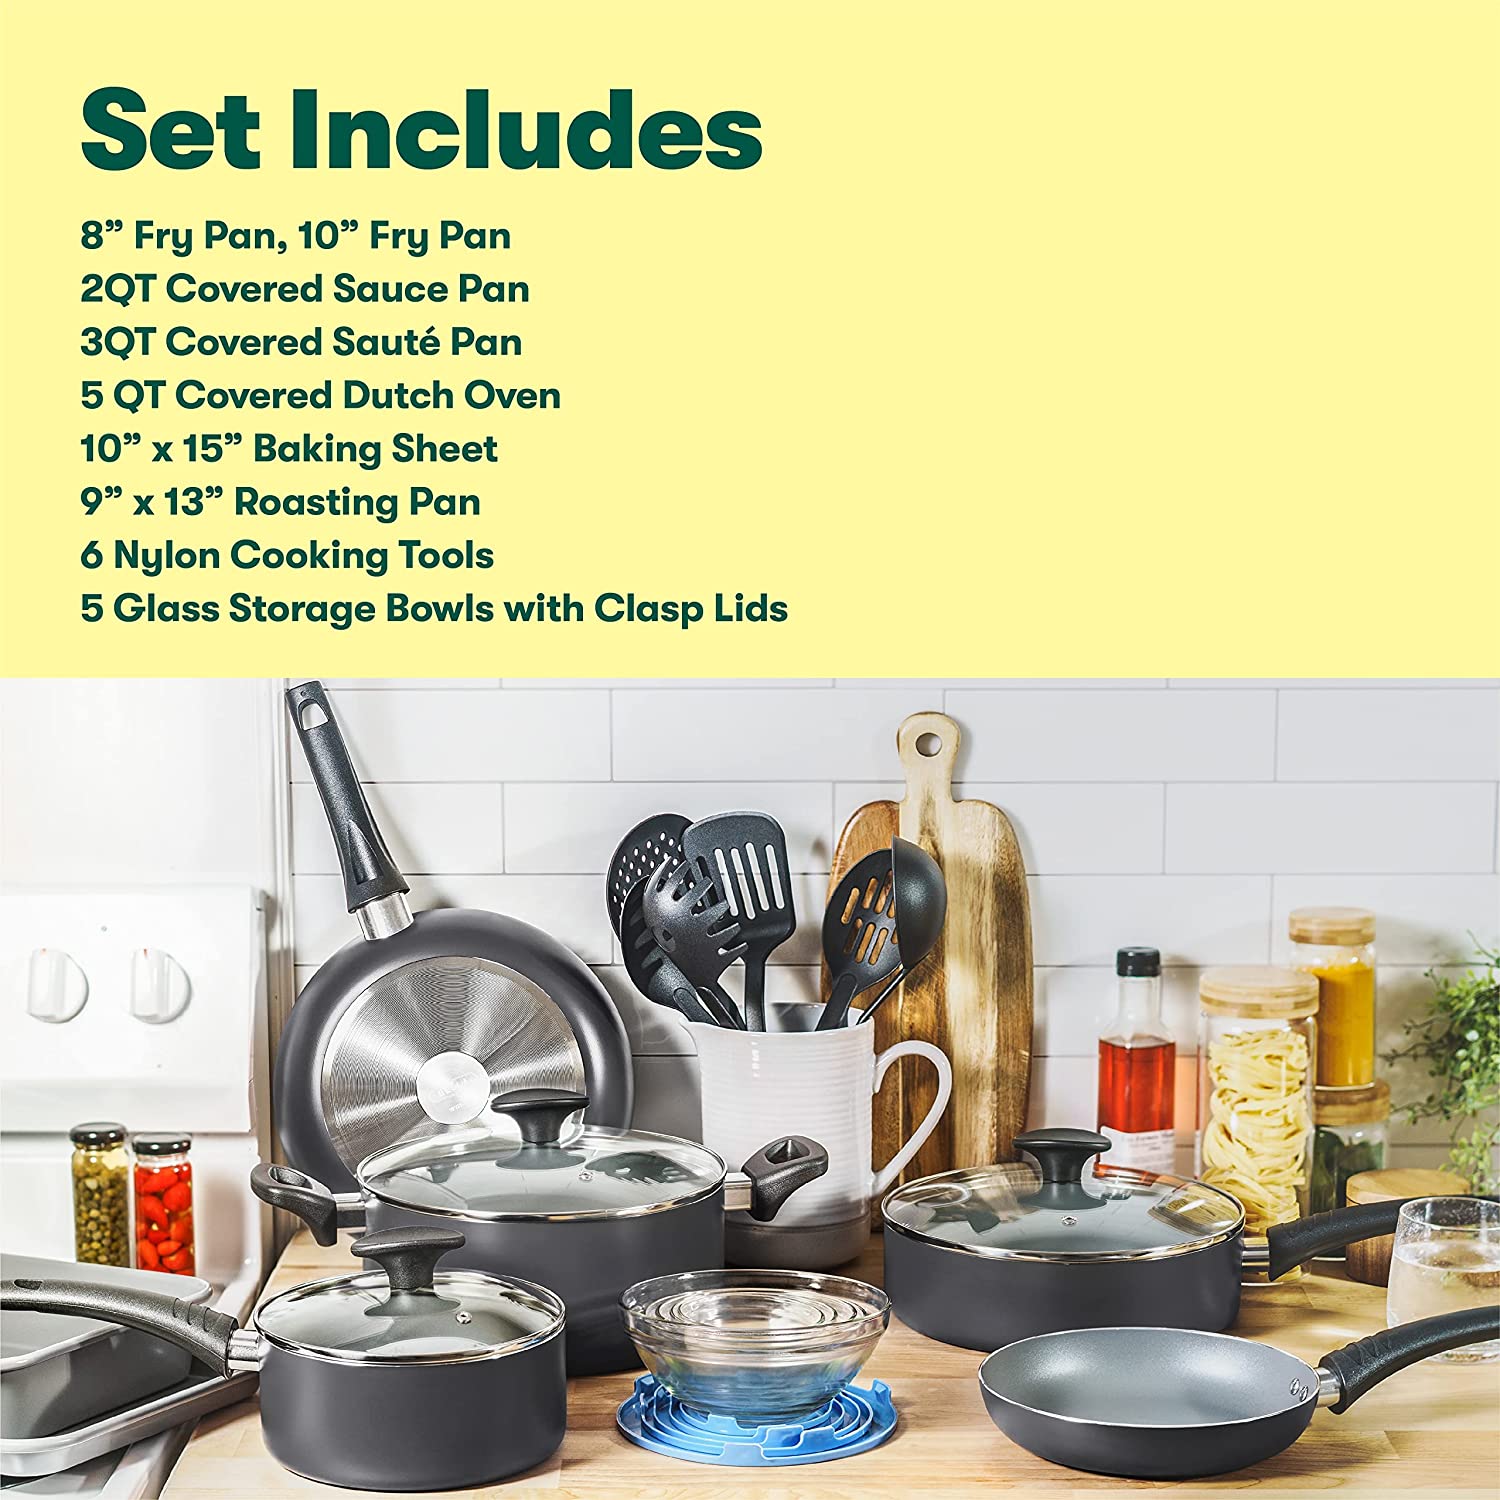  9 Pieces Yellow Non-stick Cookware Set with Glass Lid